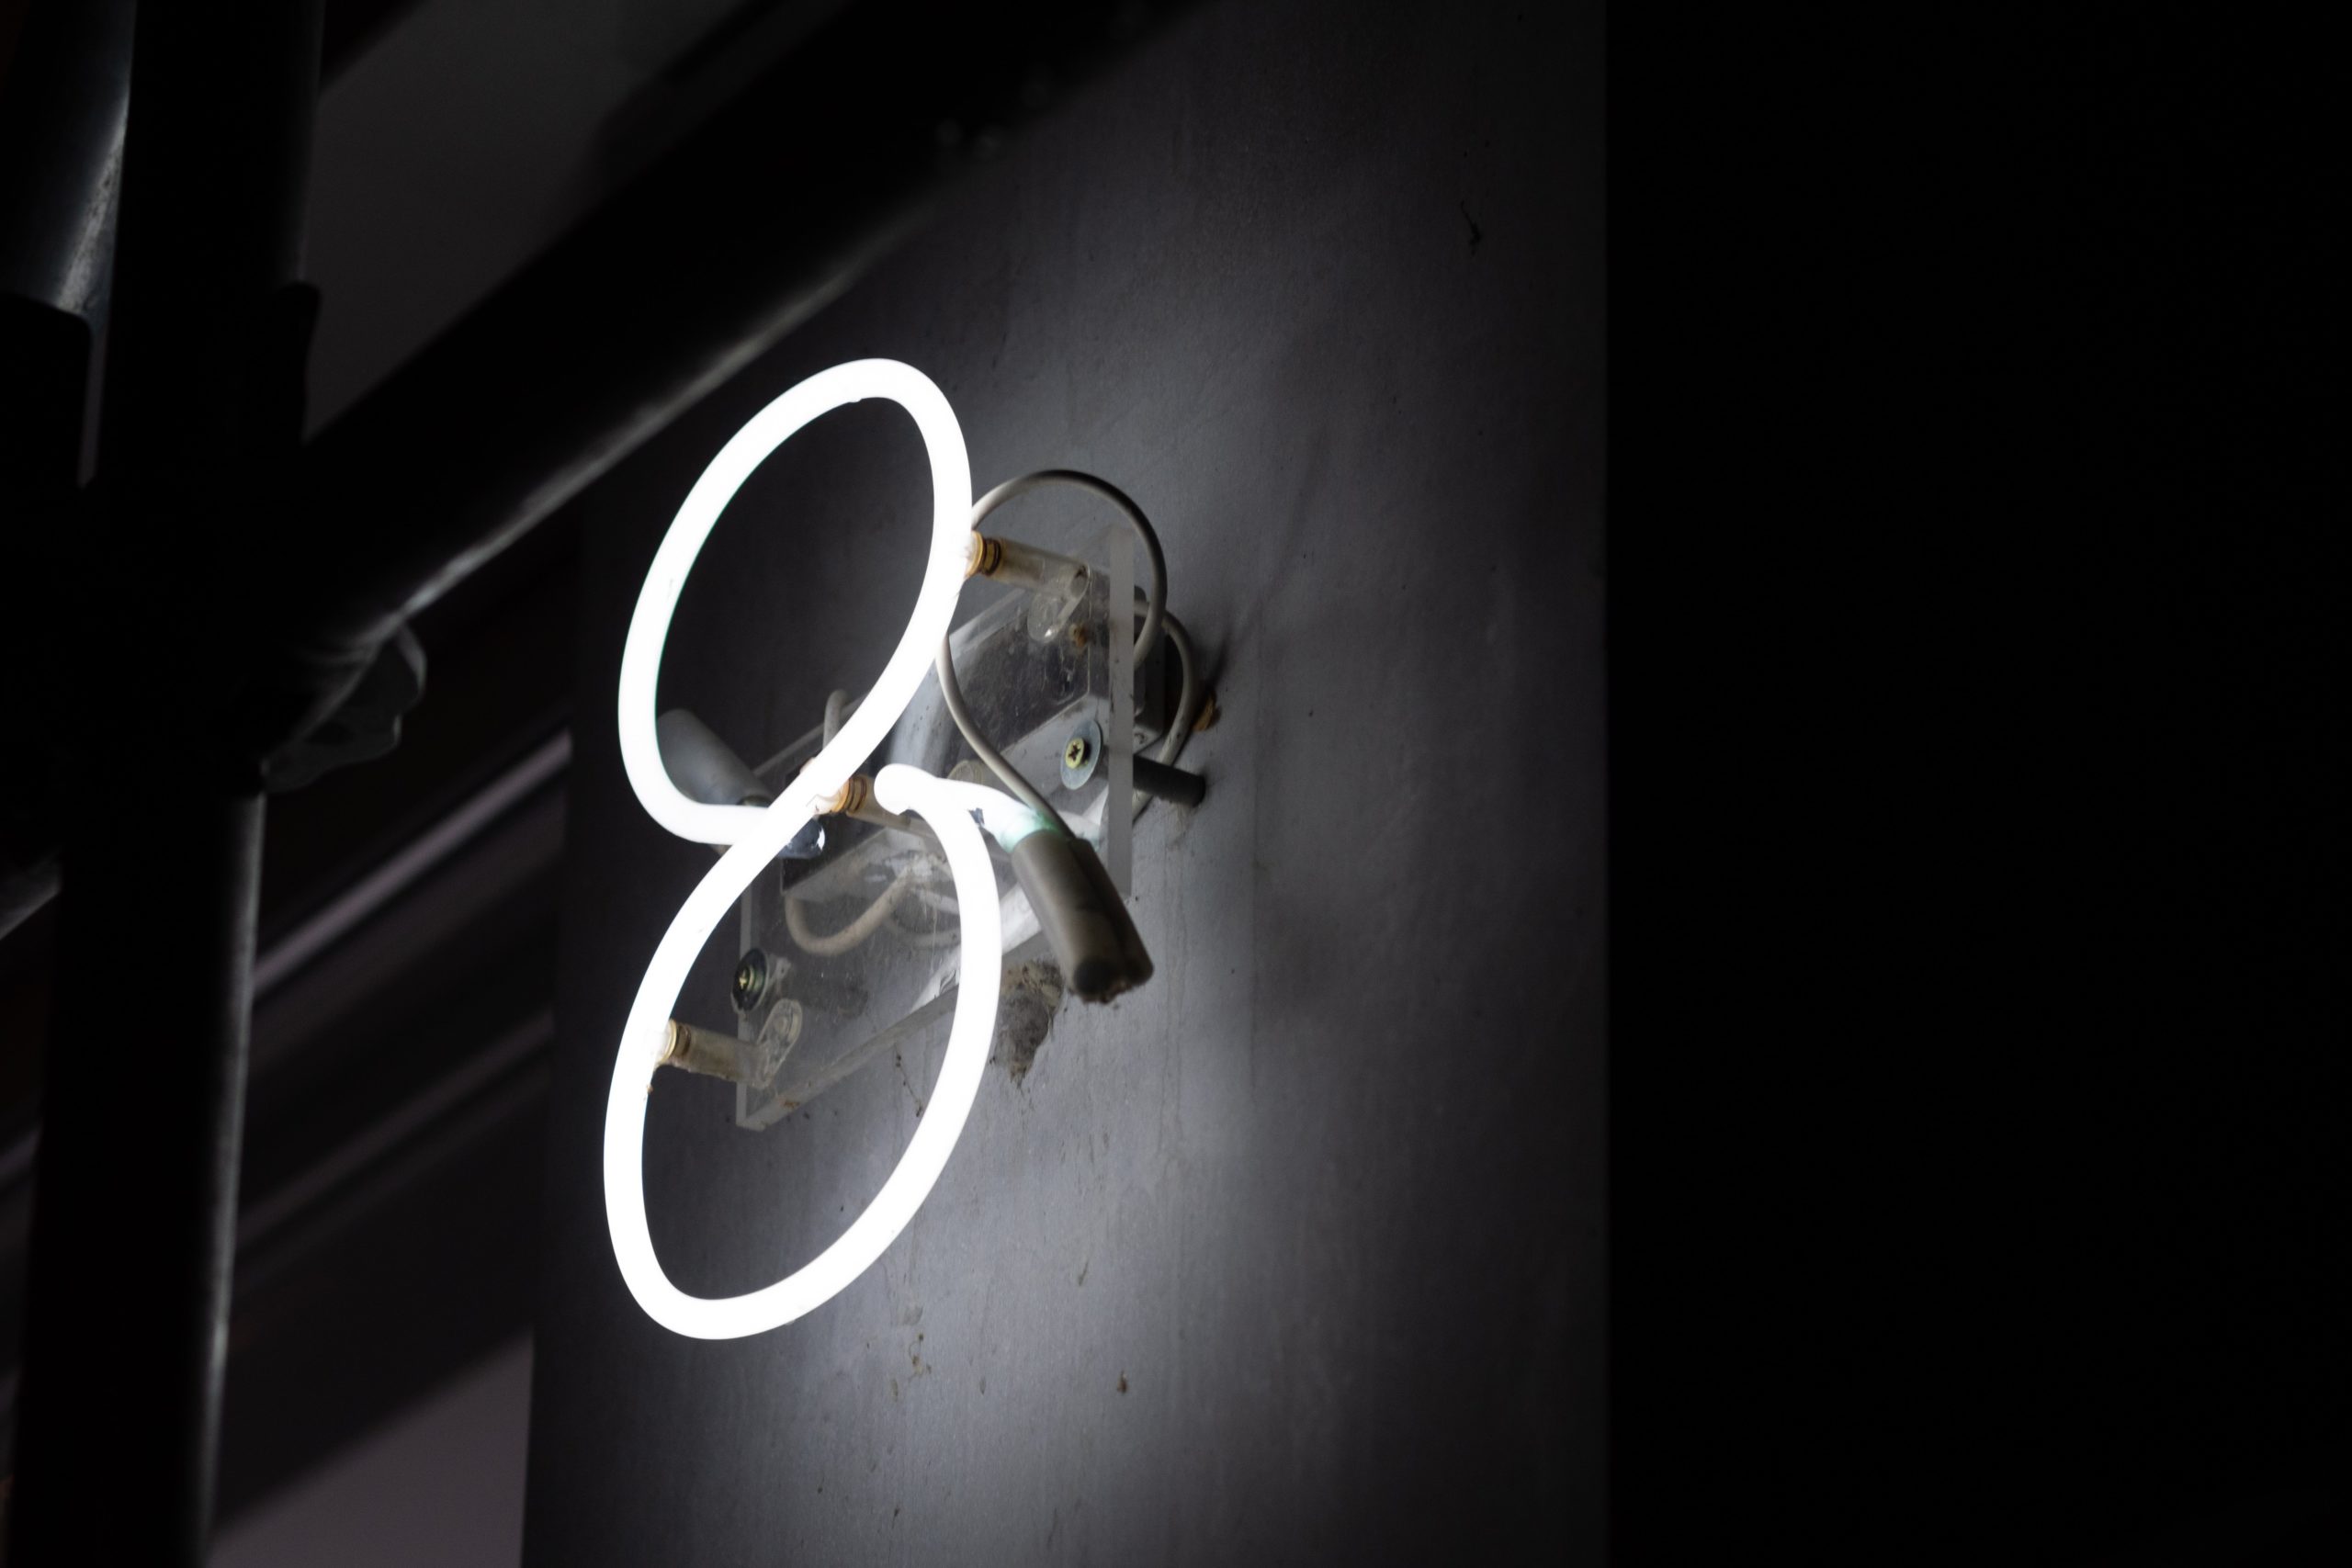 Neon number 8 mounted on wall